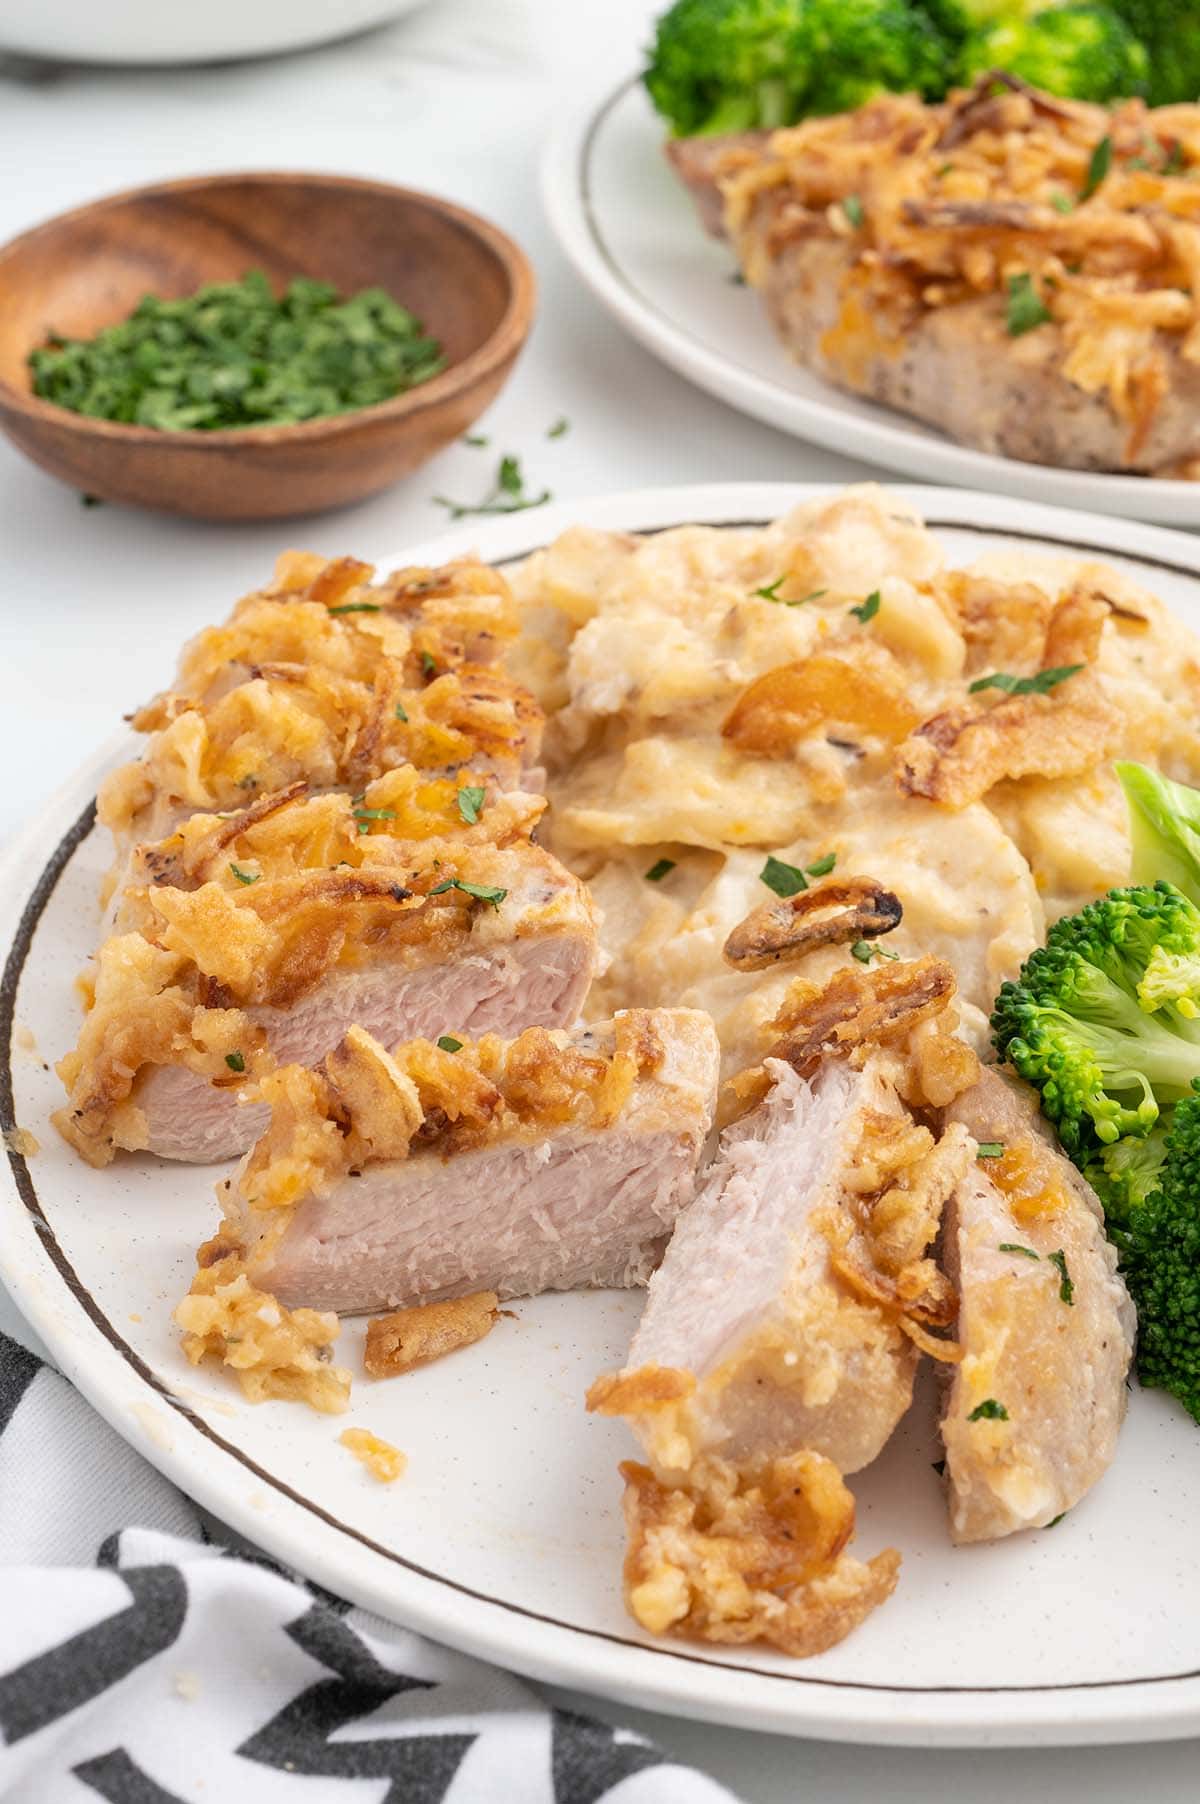 Pork Chop Casserole cut into several pieces and served with broccoli on the side.